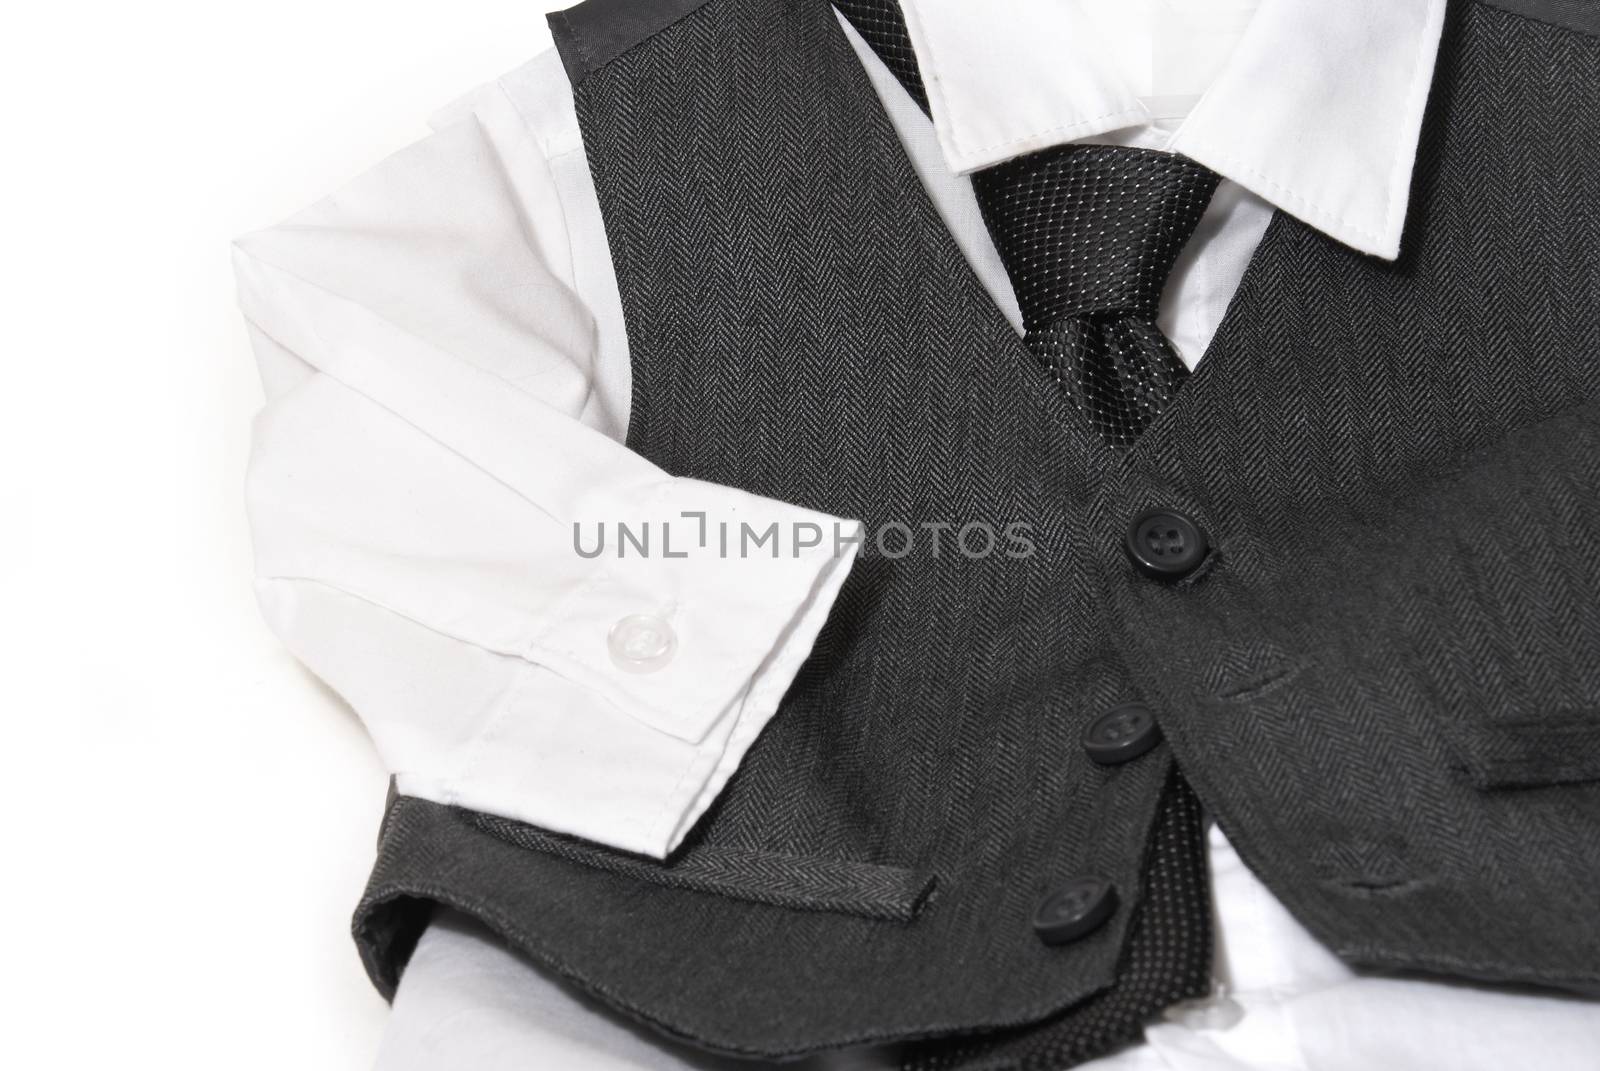 An infants dress shirt and vest are laid out for the parents to clothe their child before the formal day of events.